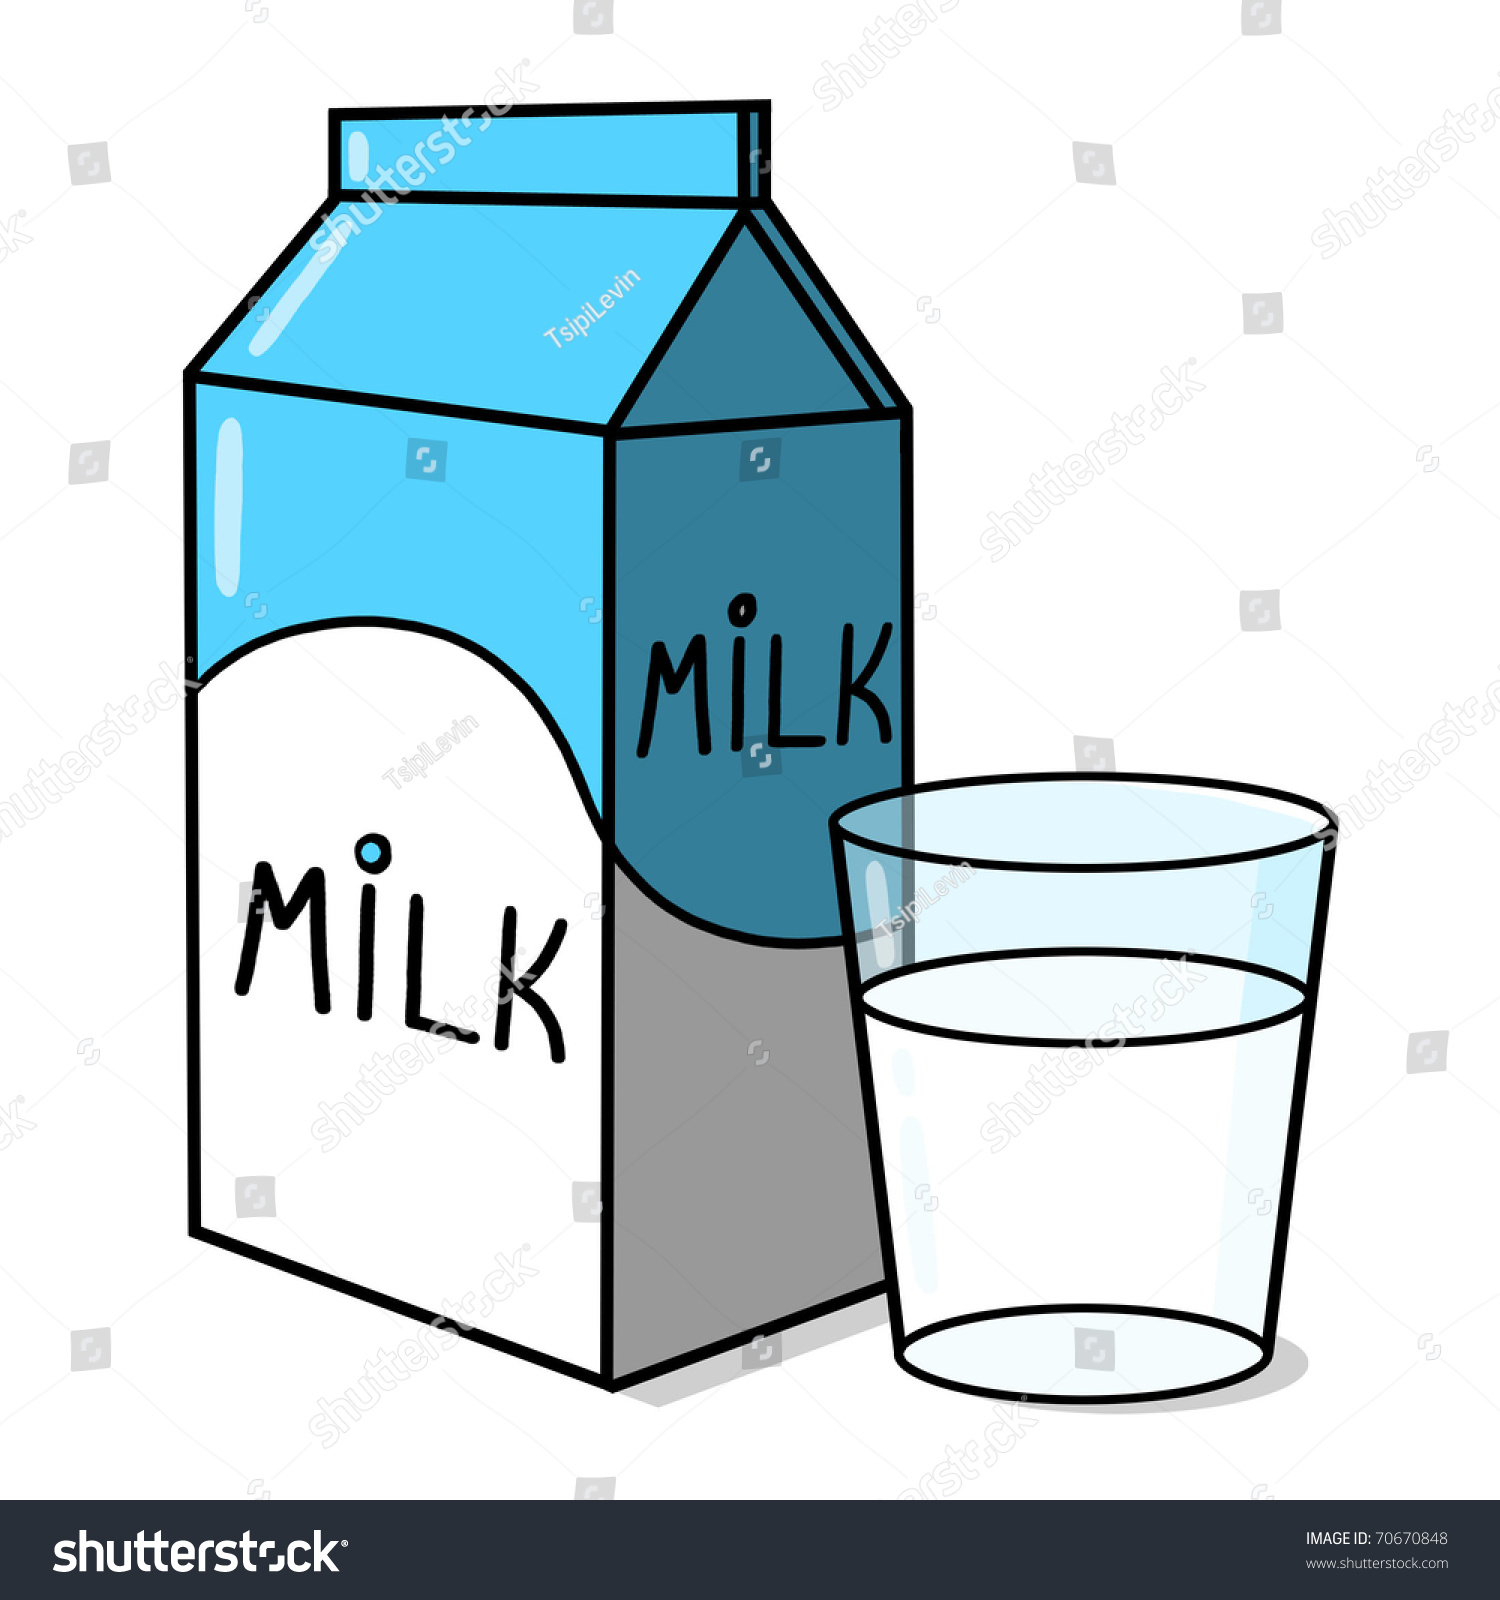 cup of milk clipart - photo #17